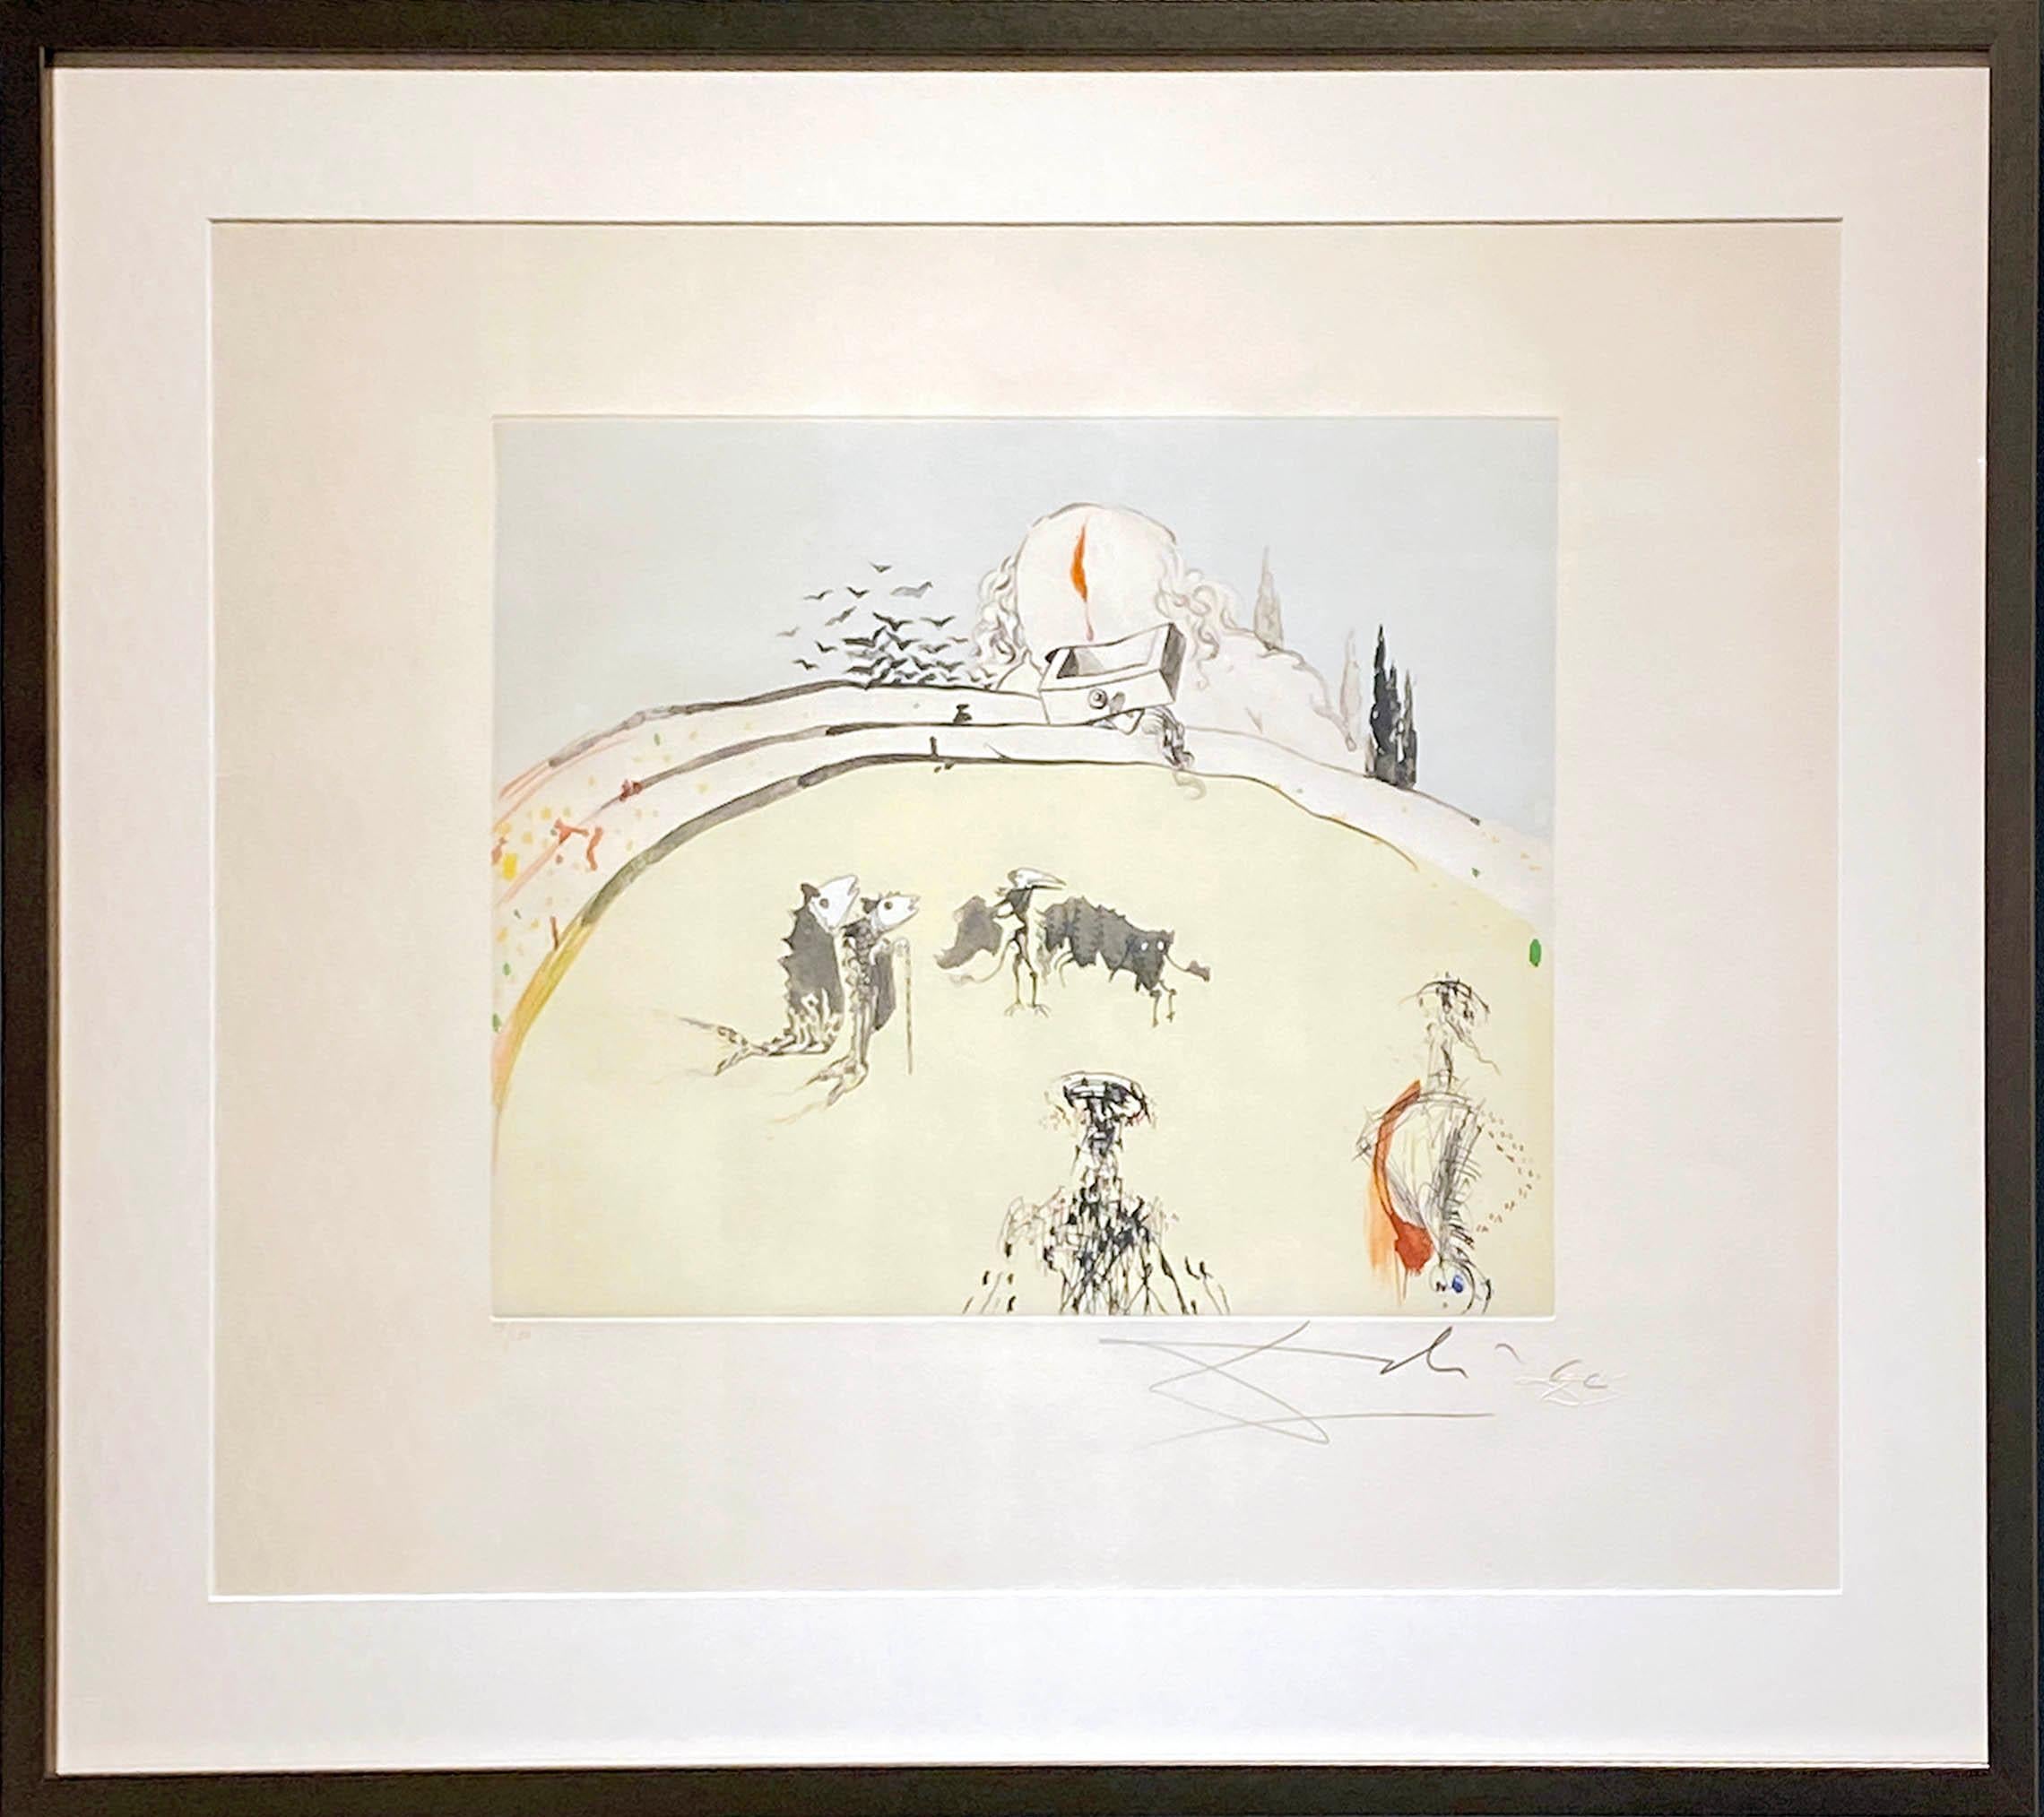 Bullfight with Drawer - Print by Salvador Dalí